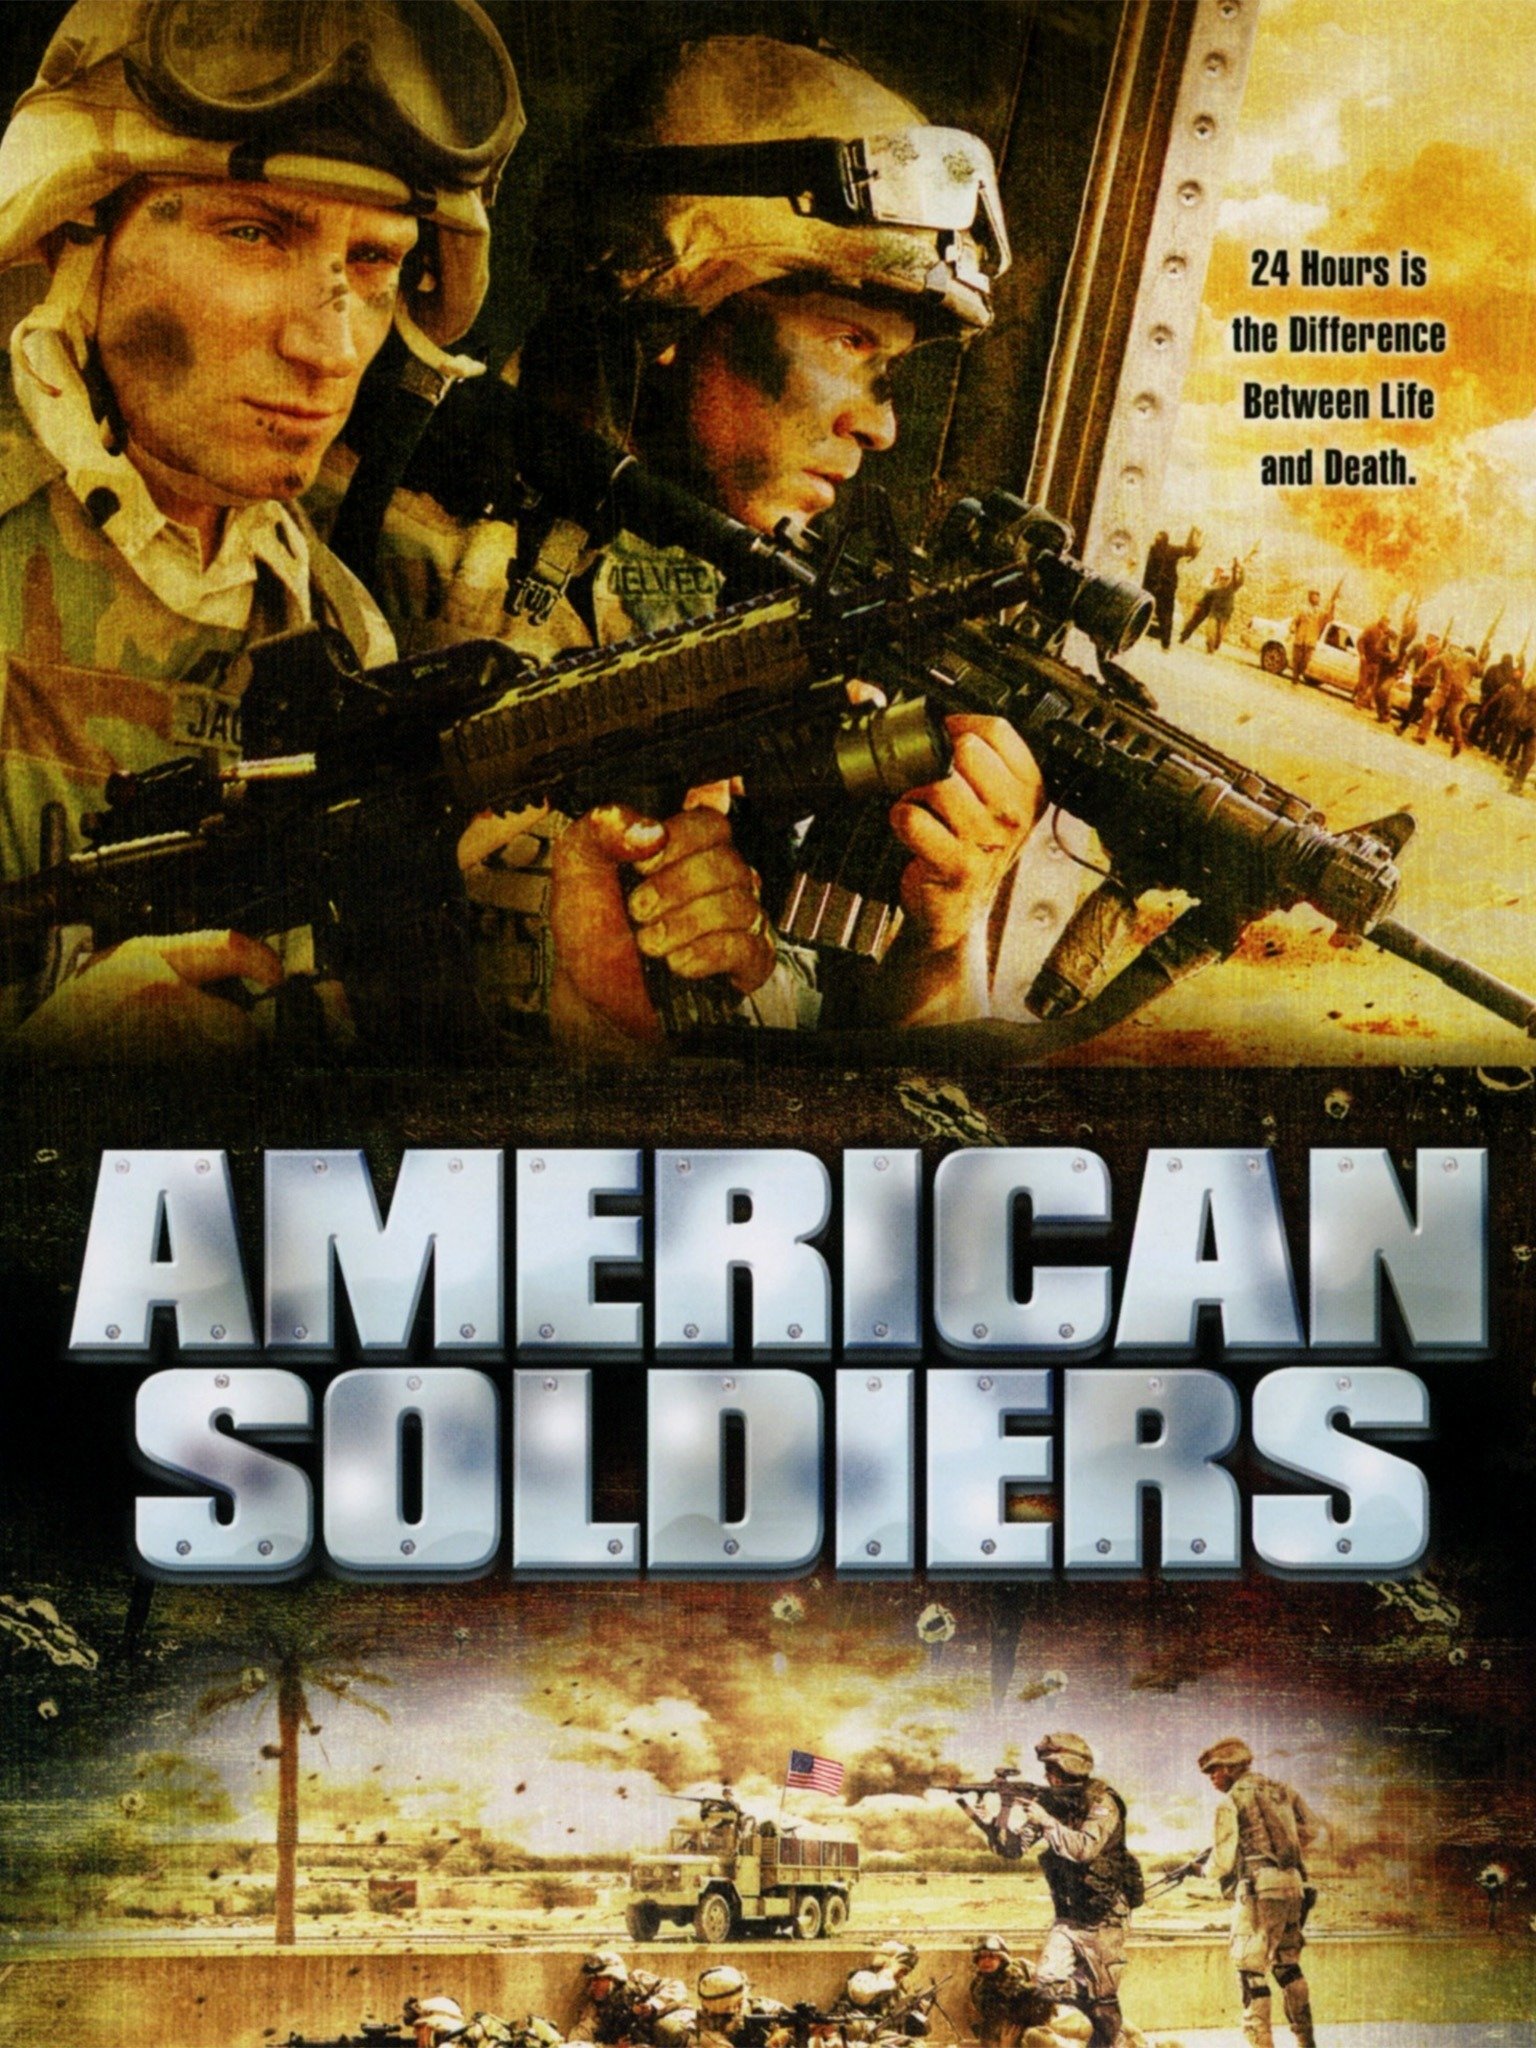 american soldiers at war